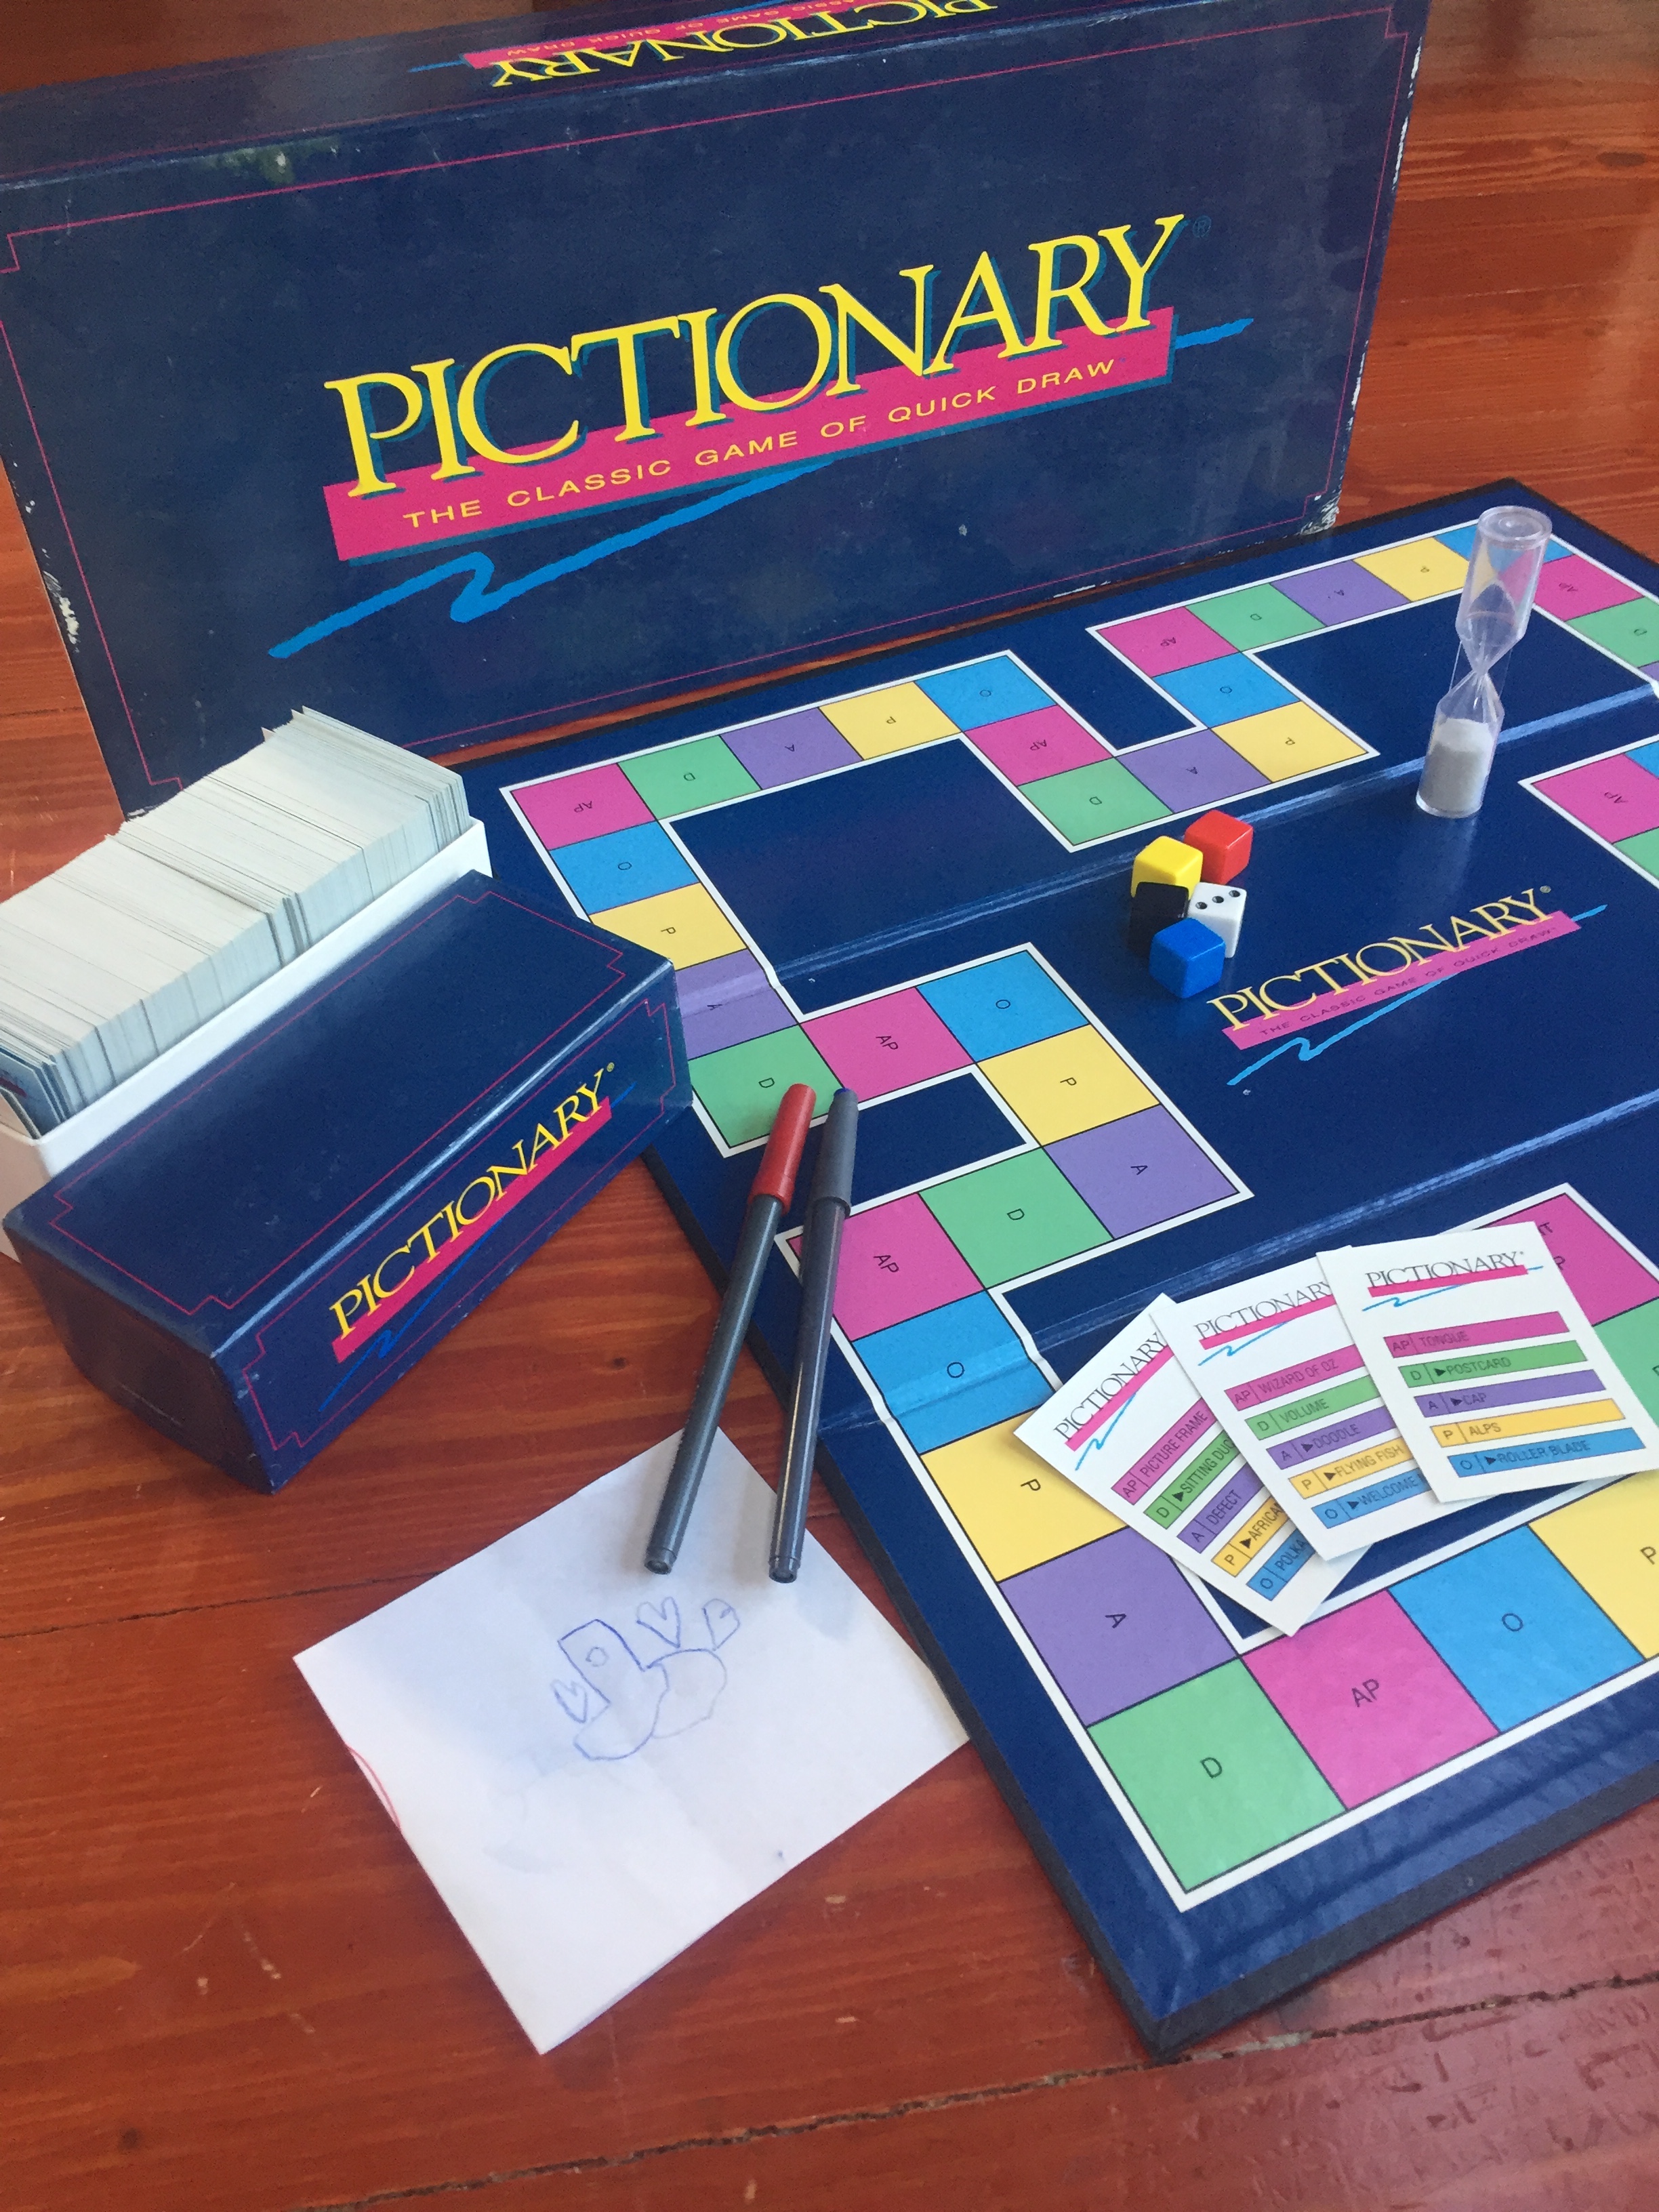 Pictionary original drawing board game for the family